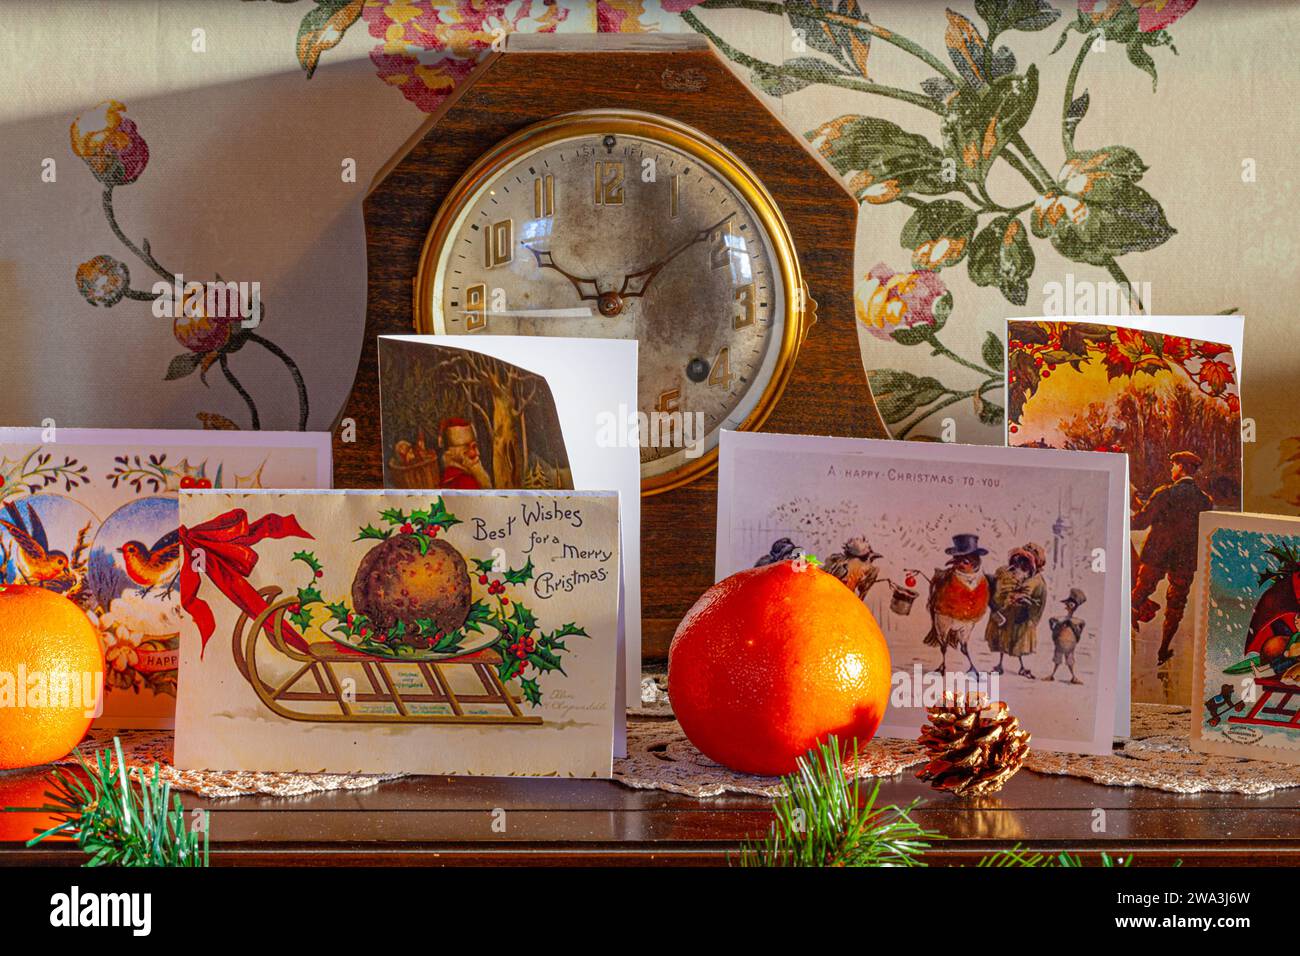 Antique Mantle Clock with period Christmas cards and decorations at the Britannia Ship Yard in Steveston Canada Stock Photo